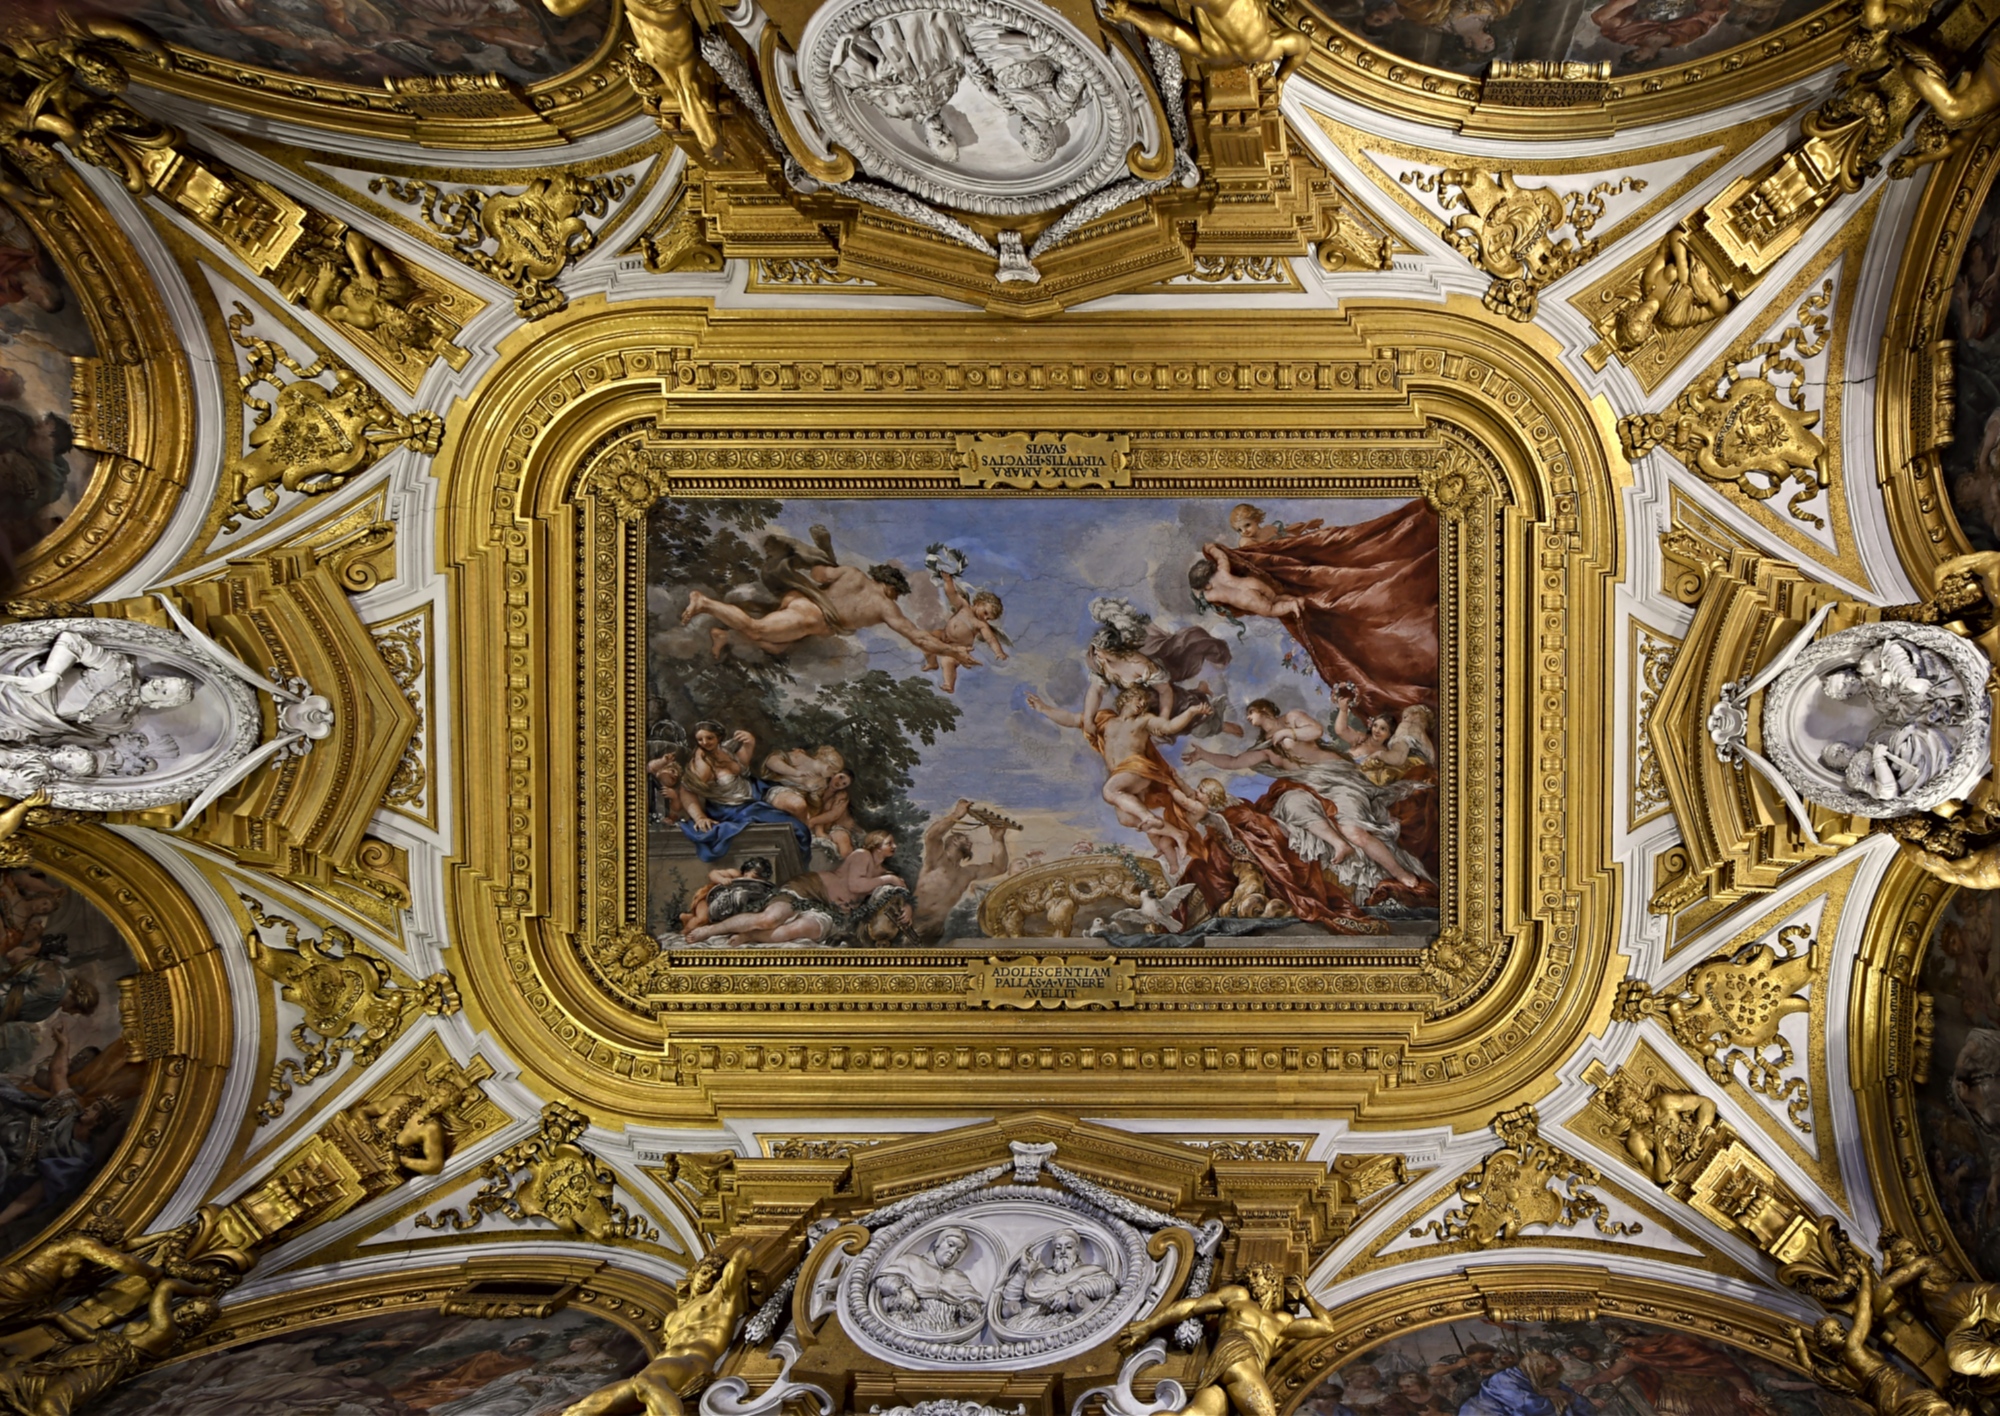 Ceiling of Hall of Venus in Palazzo Pitti, Florence